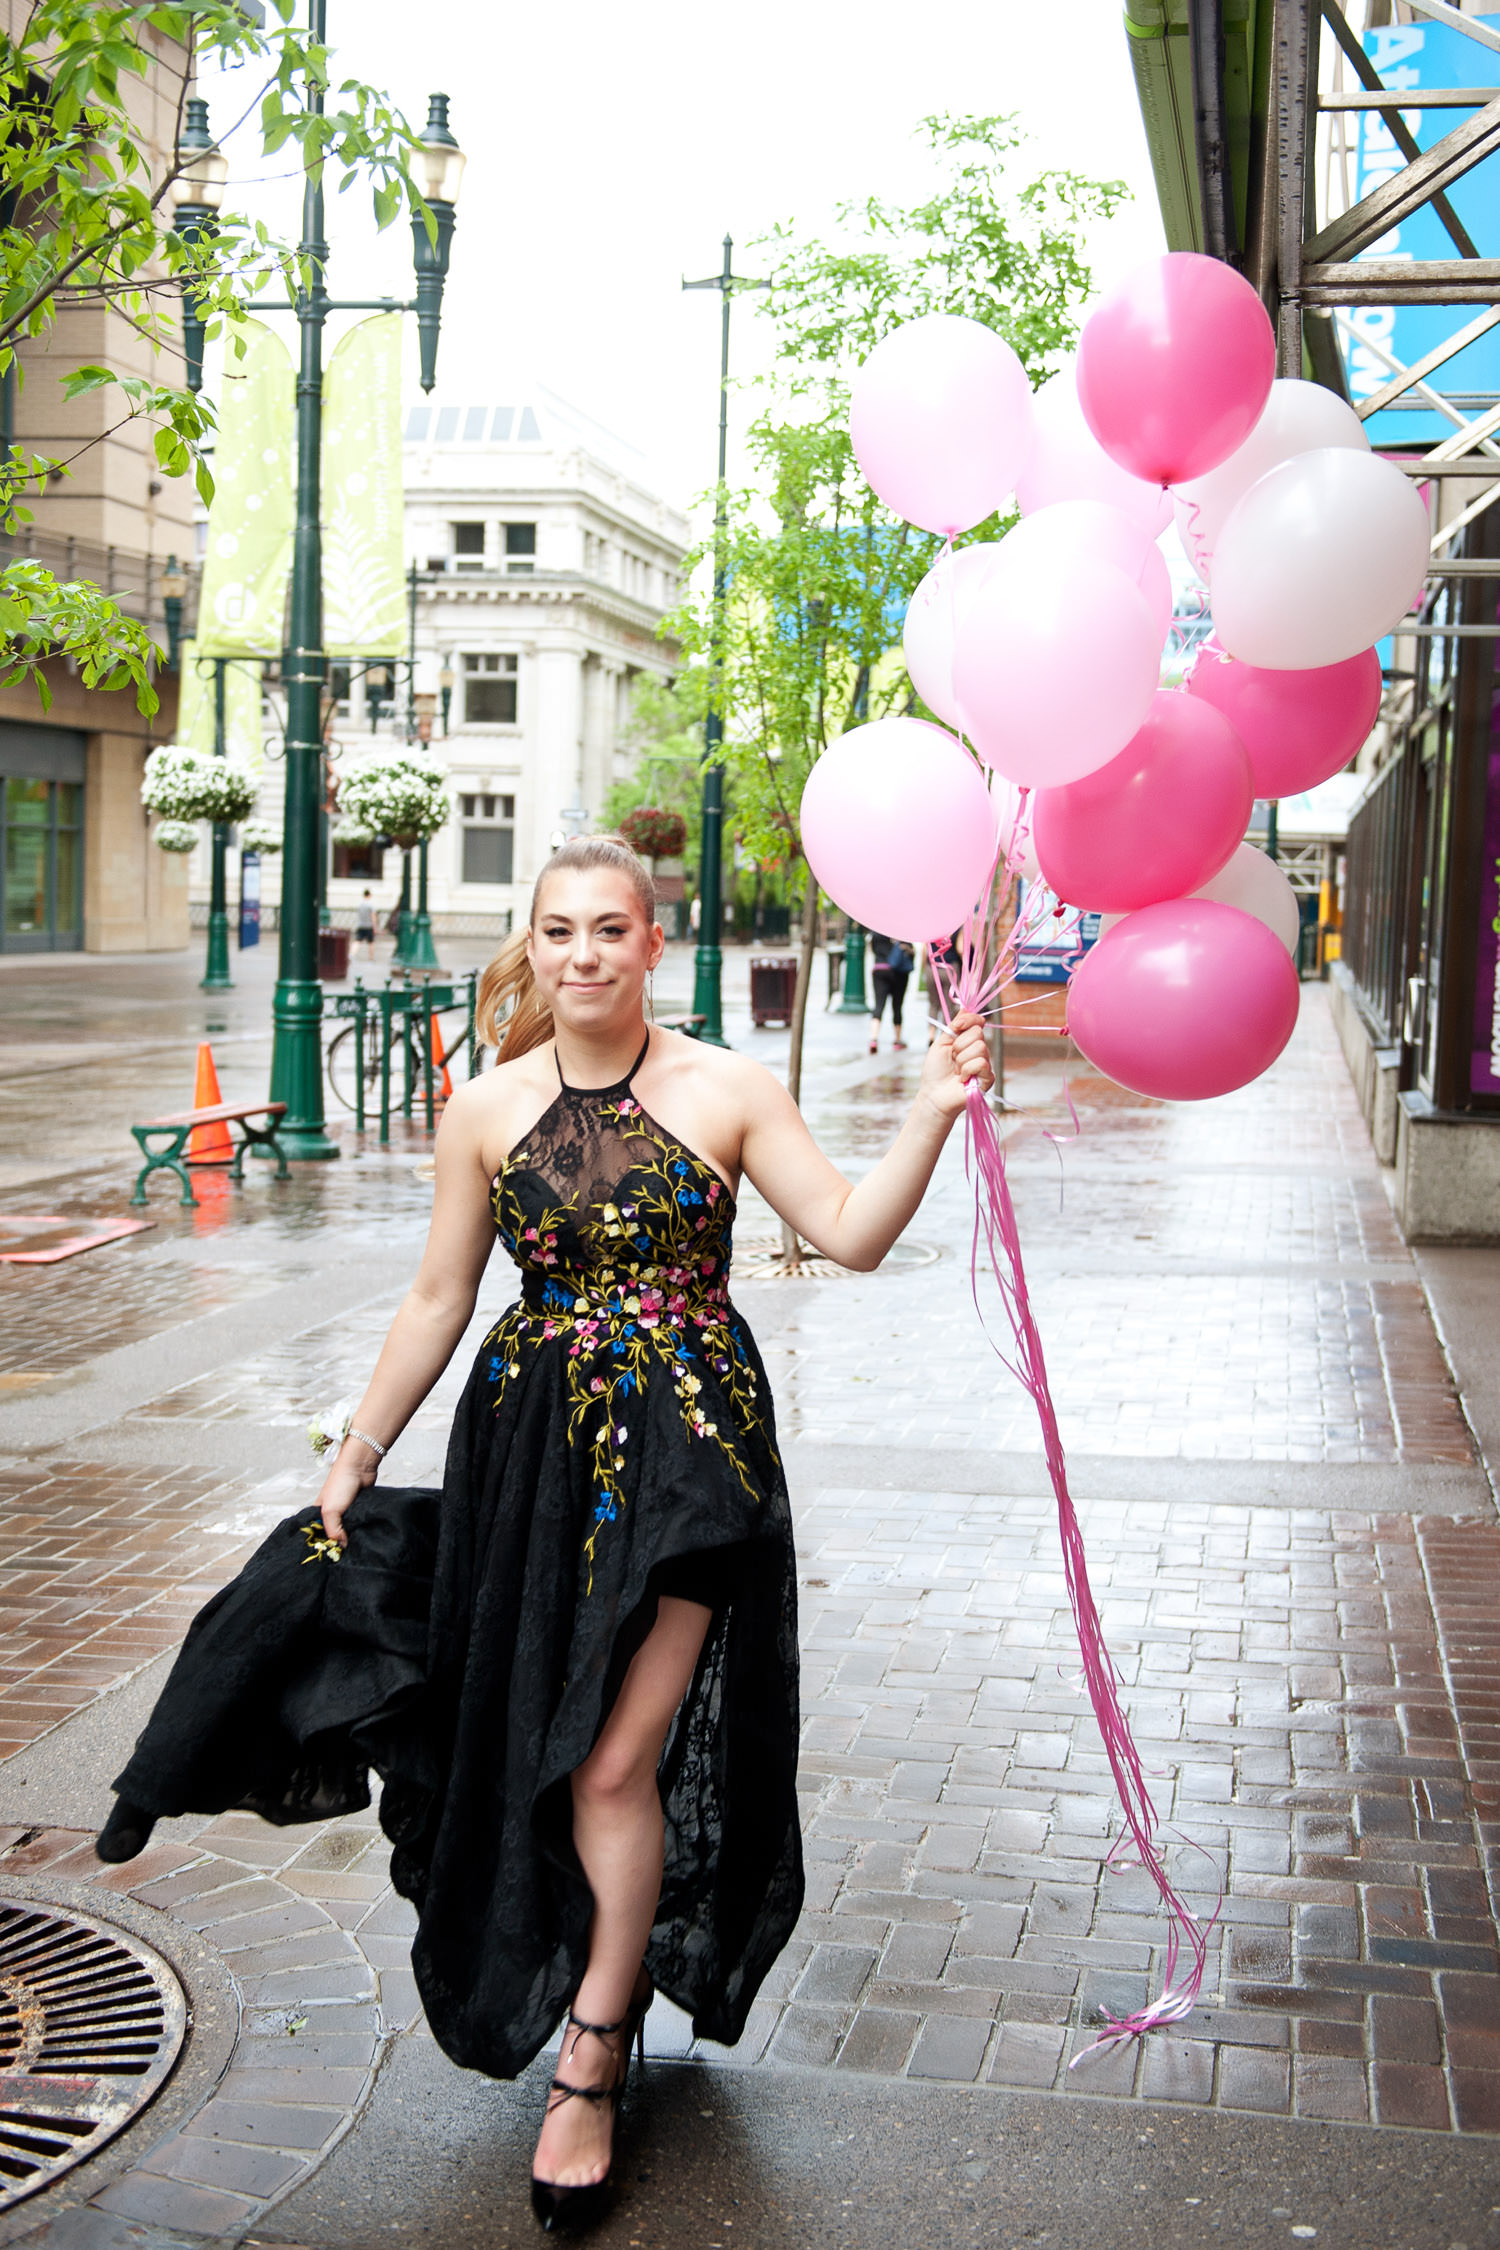 graduate carrying pink balloons on the way to her grad captured by Tara Whittaker Photography